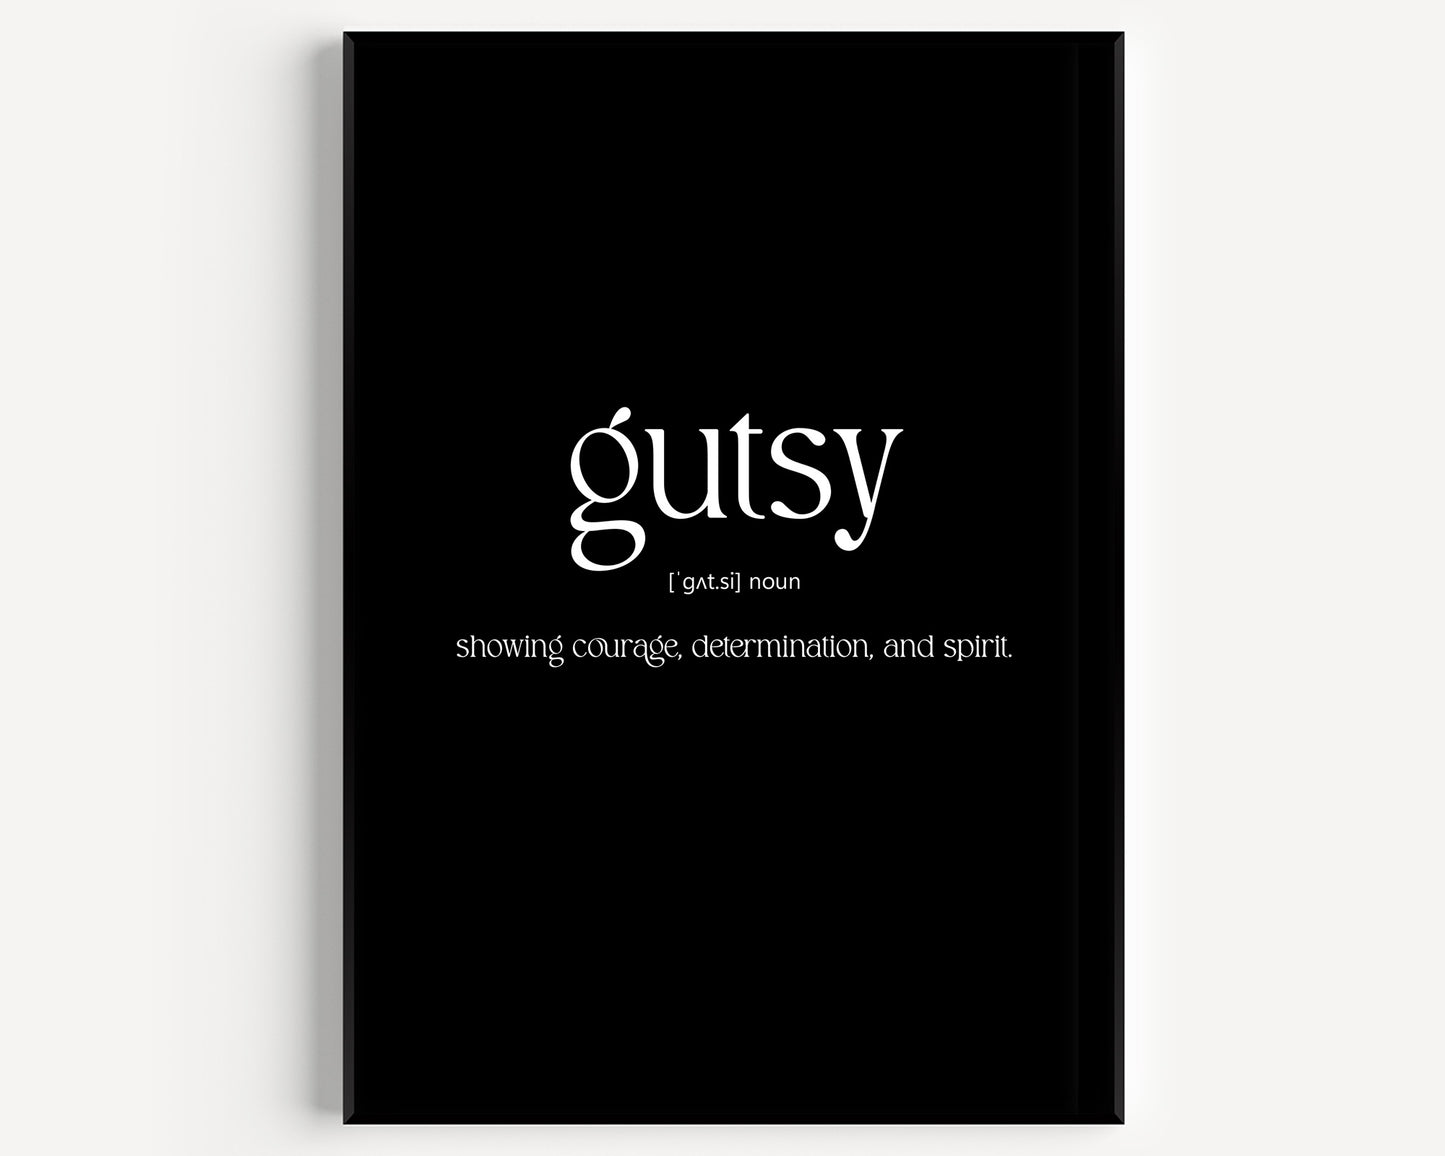 Gutsy Definition Print - Magic Posters